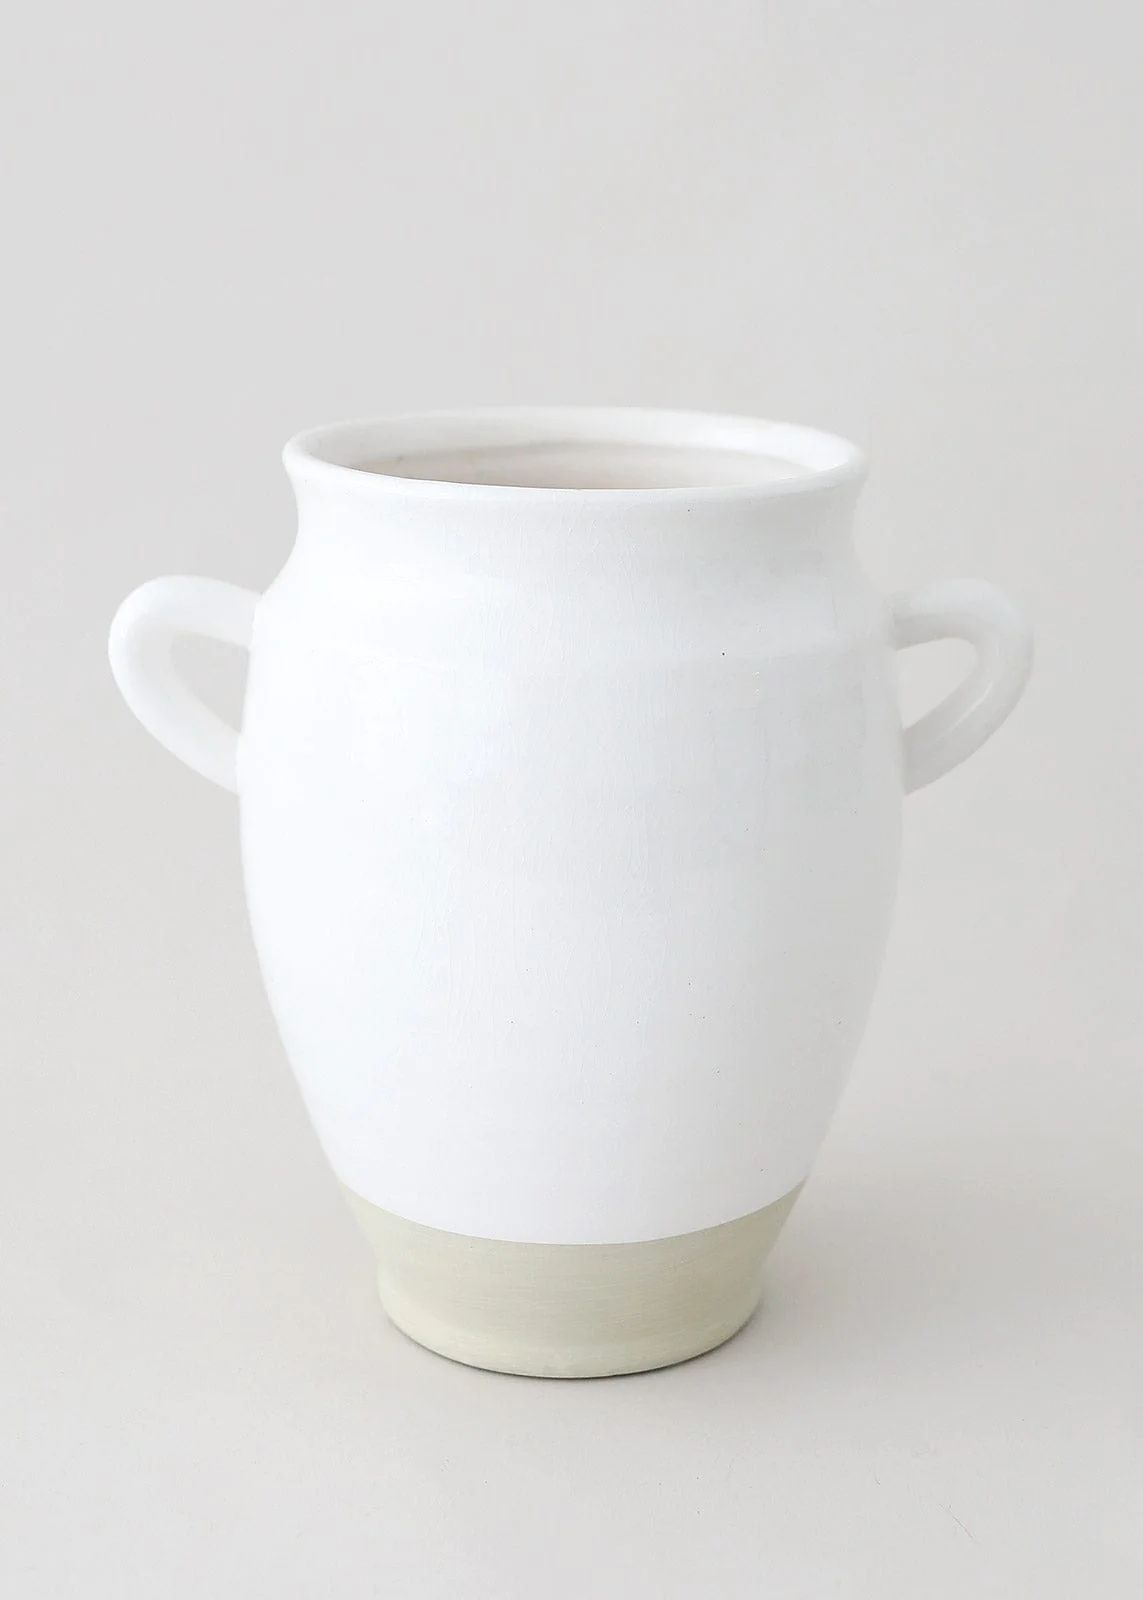 White Ceramic Farmhouse Urn Vase with Handles - 9.5" Tall | Afloral (US)